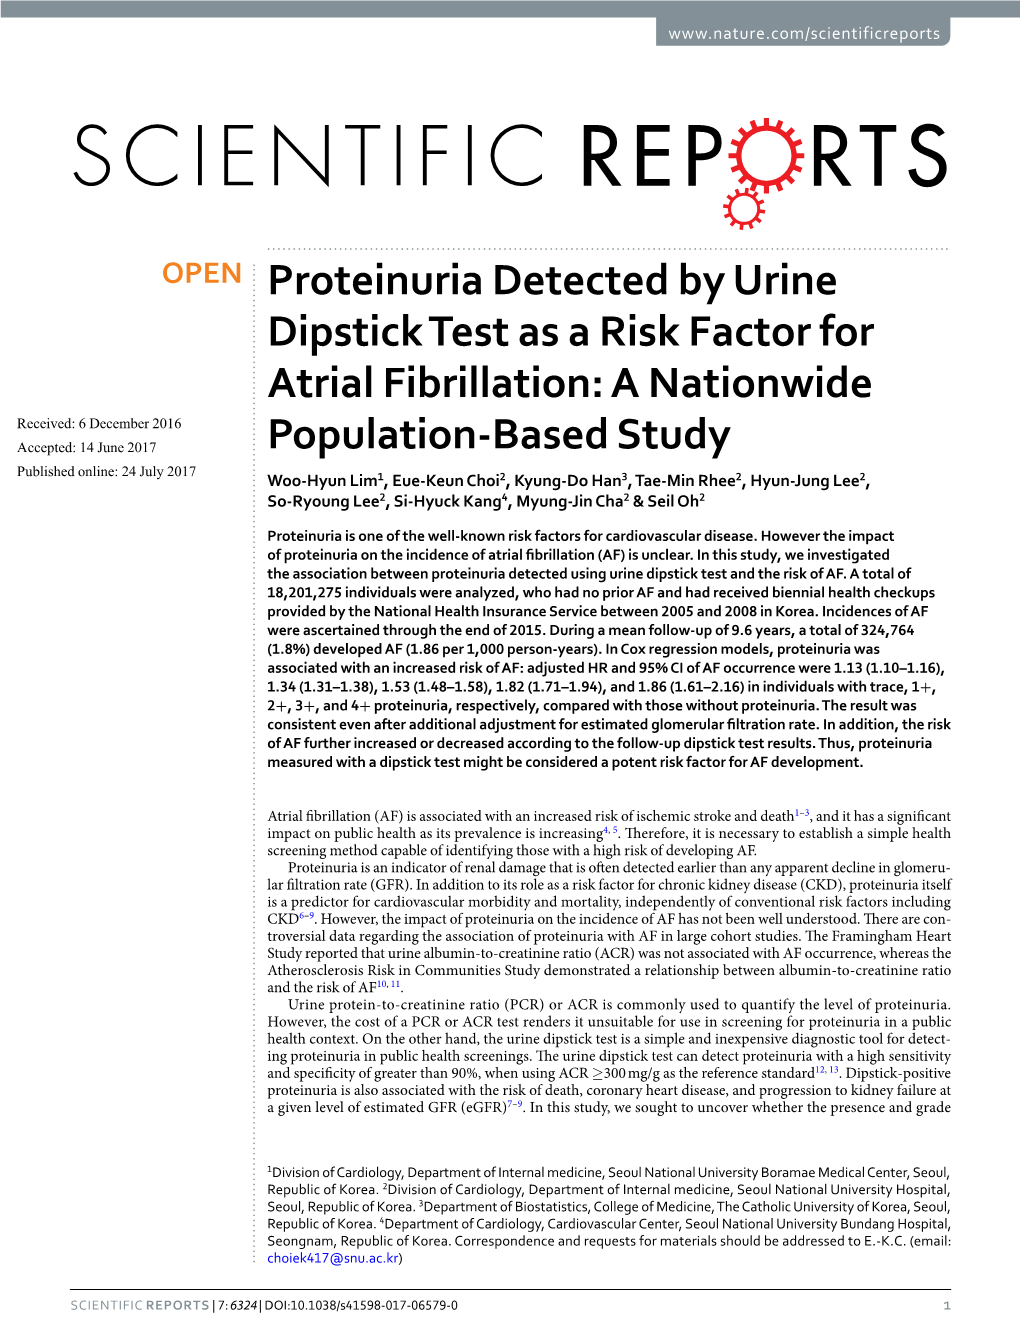 Proteinuria Detected by Urine Dipstick Test As a Risk Factor For